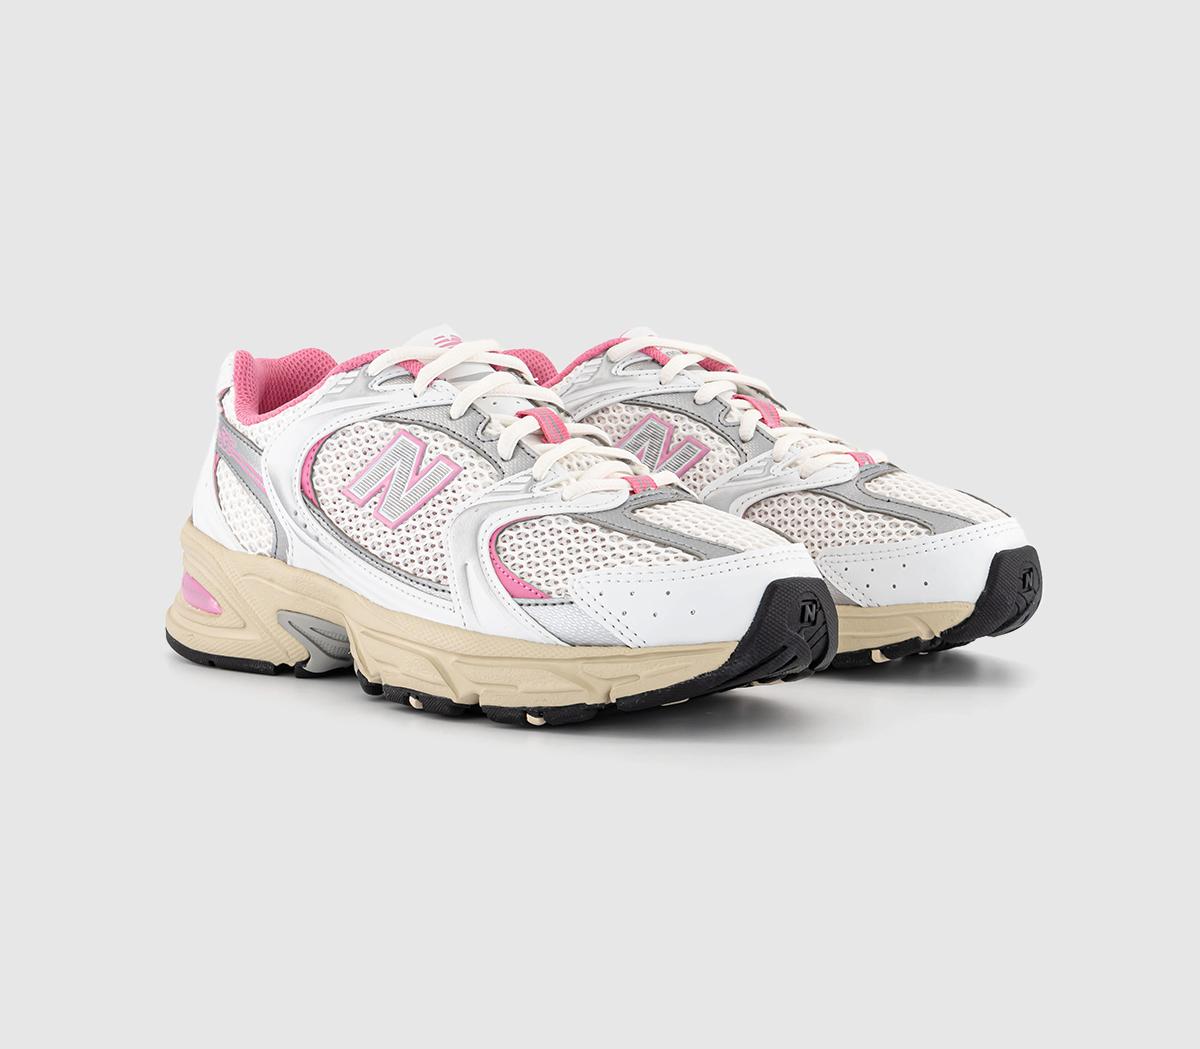 New Balance Womens Mr530 Trainers Off White Pink Silver, 6